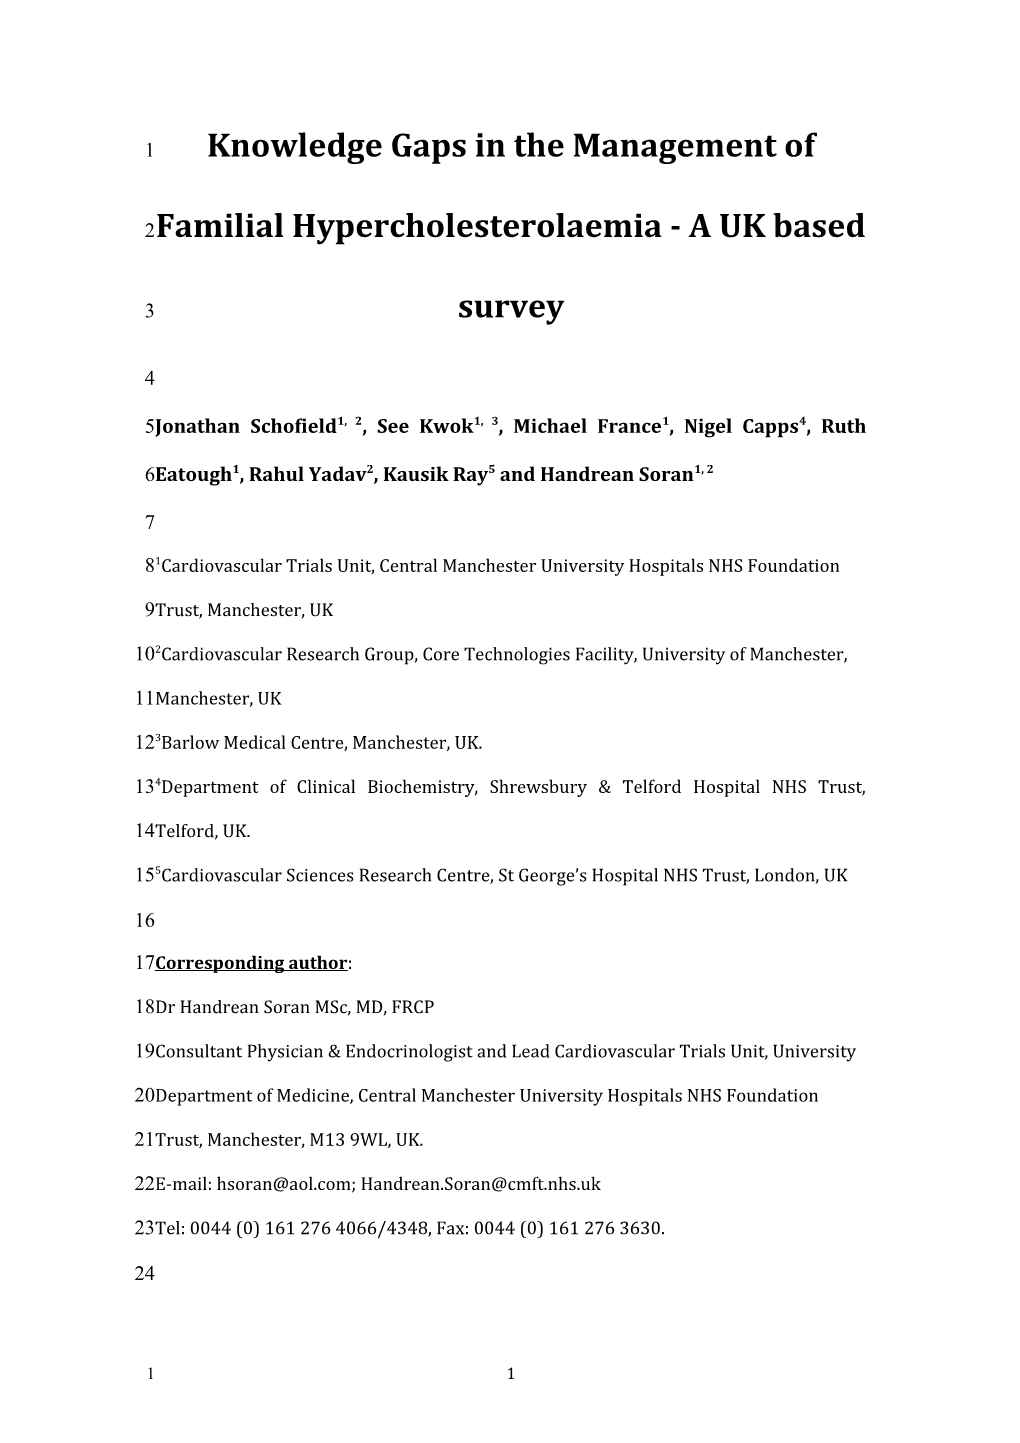 Familial Hypercholesterolaemia Knowledge and the Effect of Education